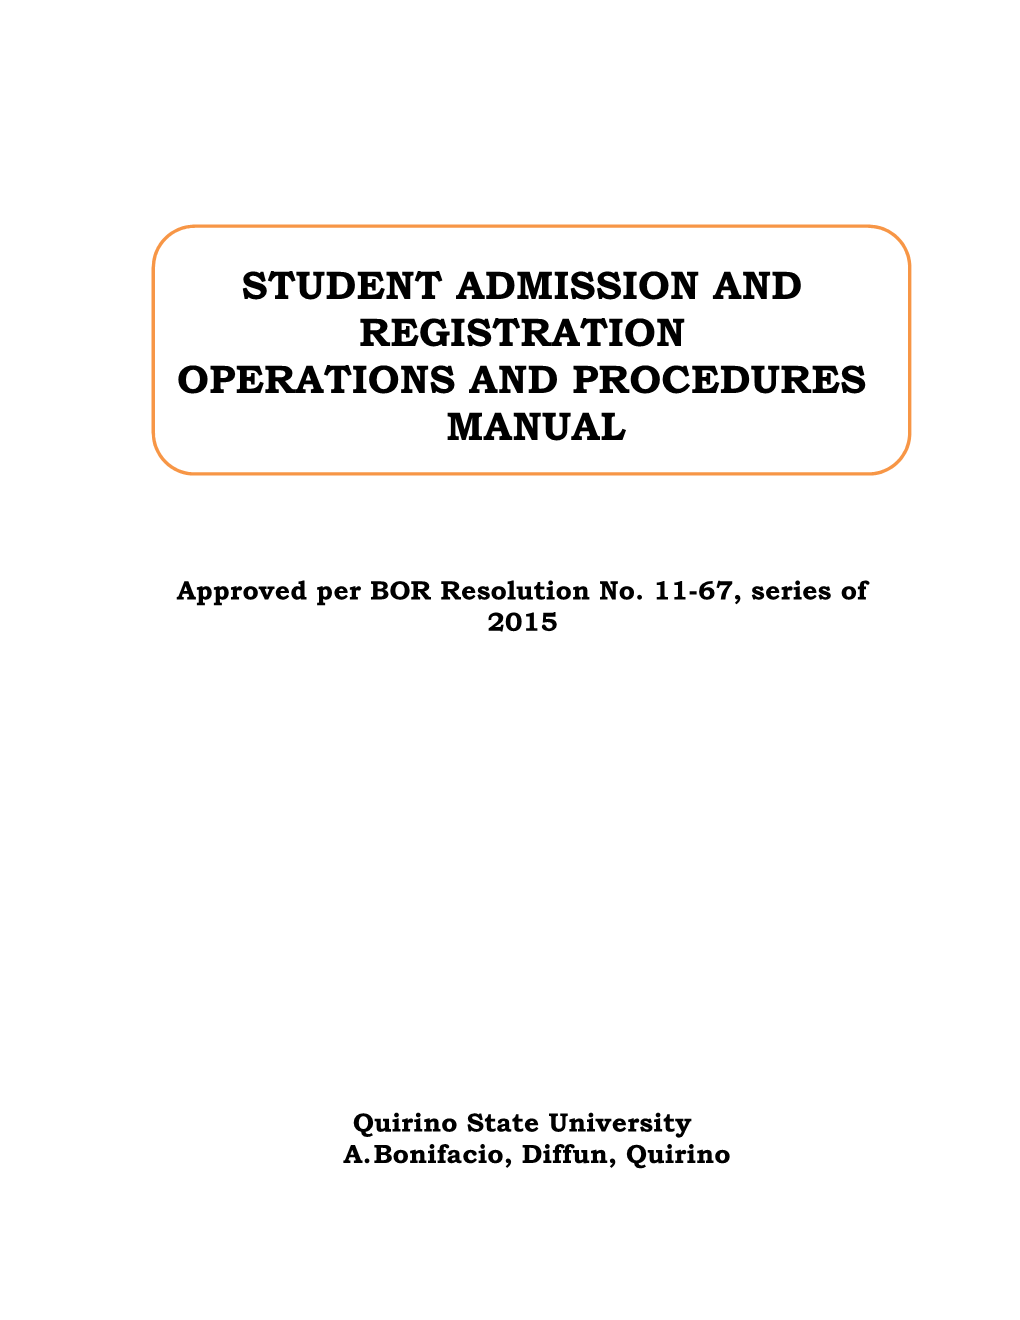 Student Admission and Registration Operations and Procedures Manual